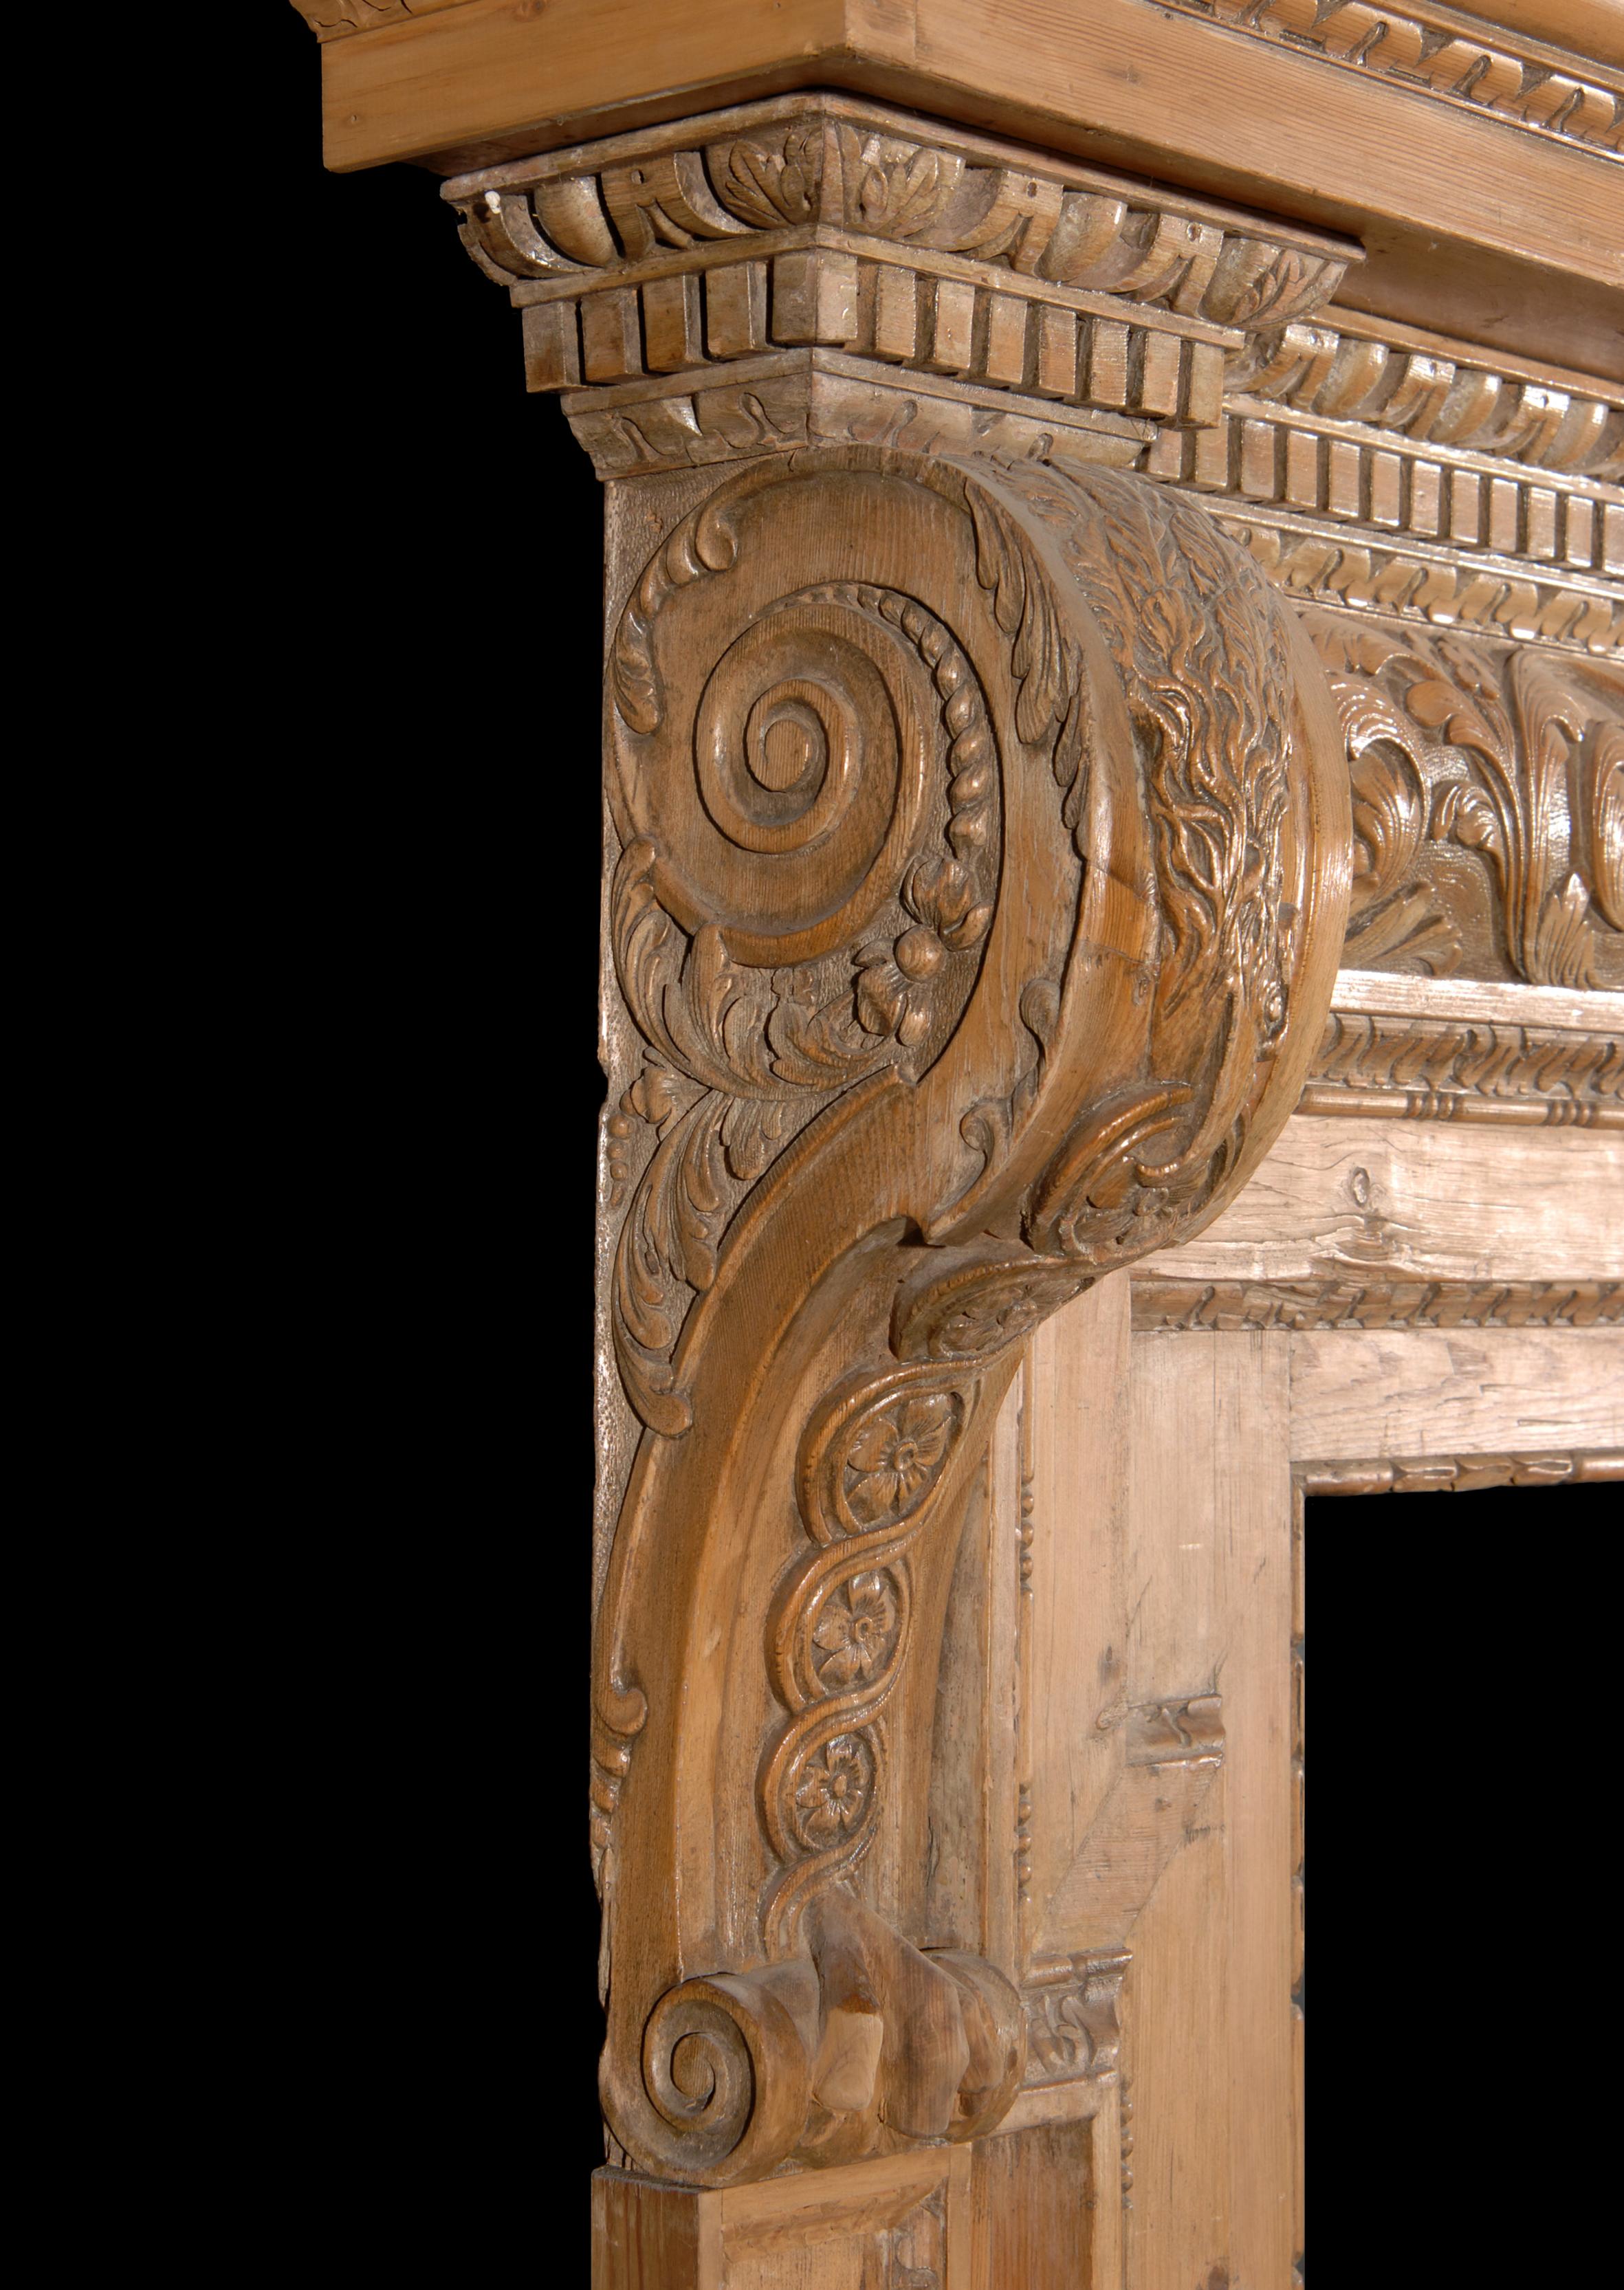 An 18th century (circa 1750) George II pine doorway. The barrel frieze carved with shell centre and scrolled leaves and foliage, surmounted by egg and dart dentil cornice. Panelled pilaster jambs with small leaf moulding, drapped eagles to the